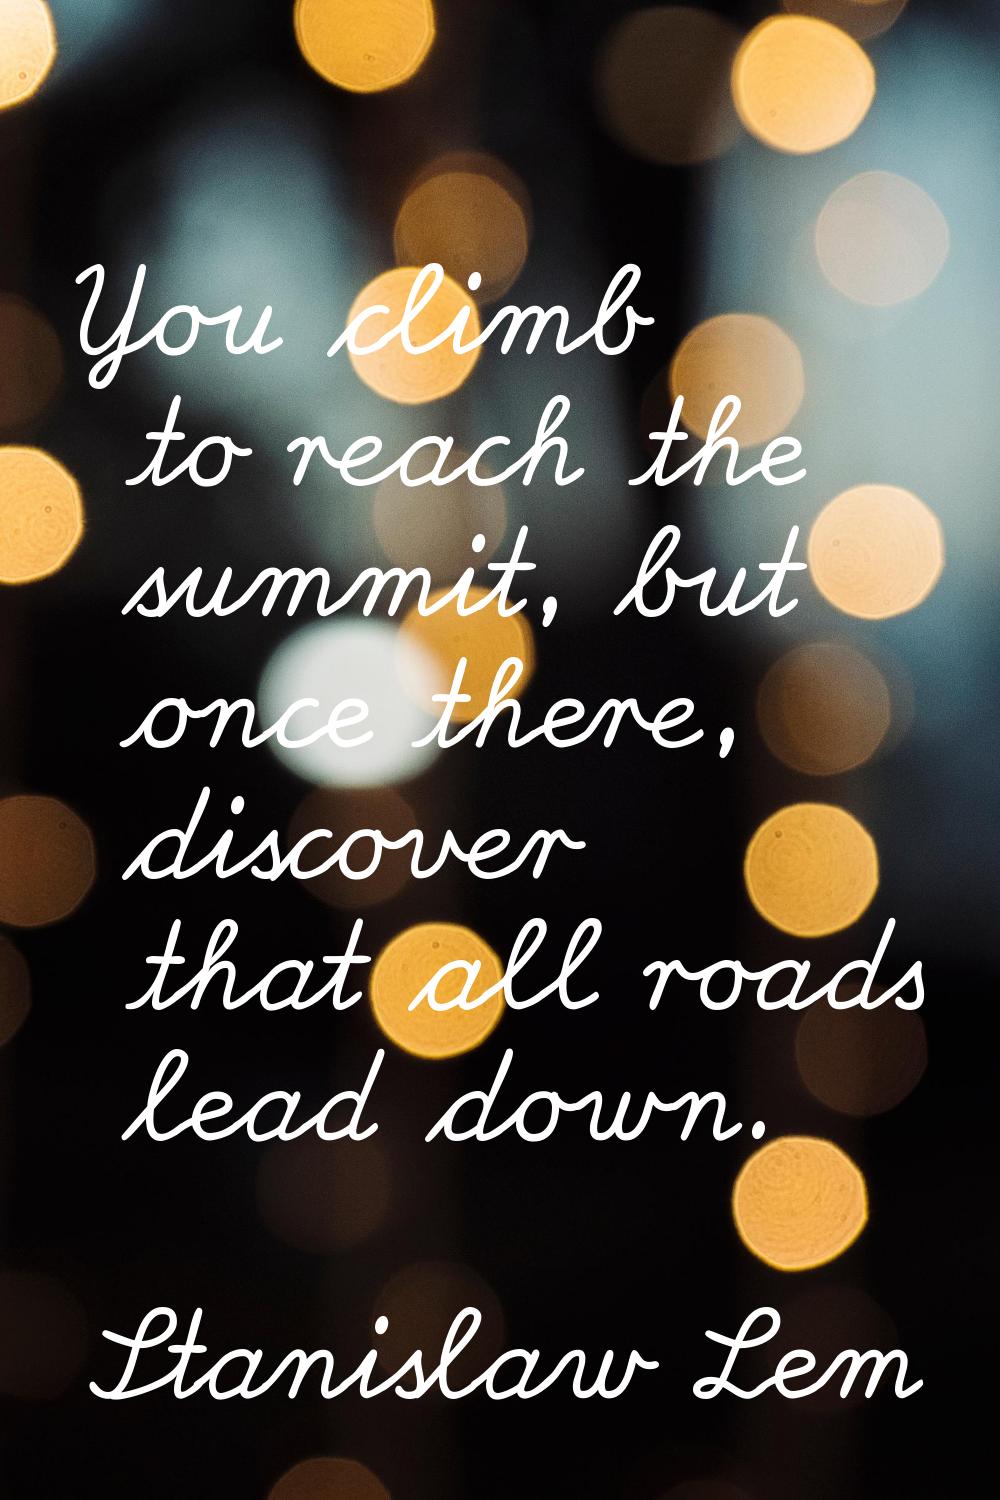 You climb to reach the summit, but once there, discover that all roads lead down.